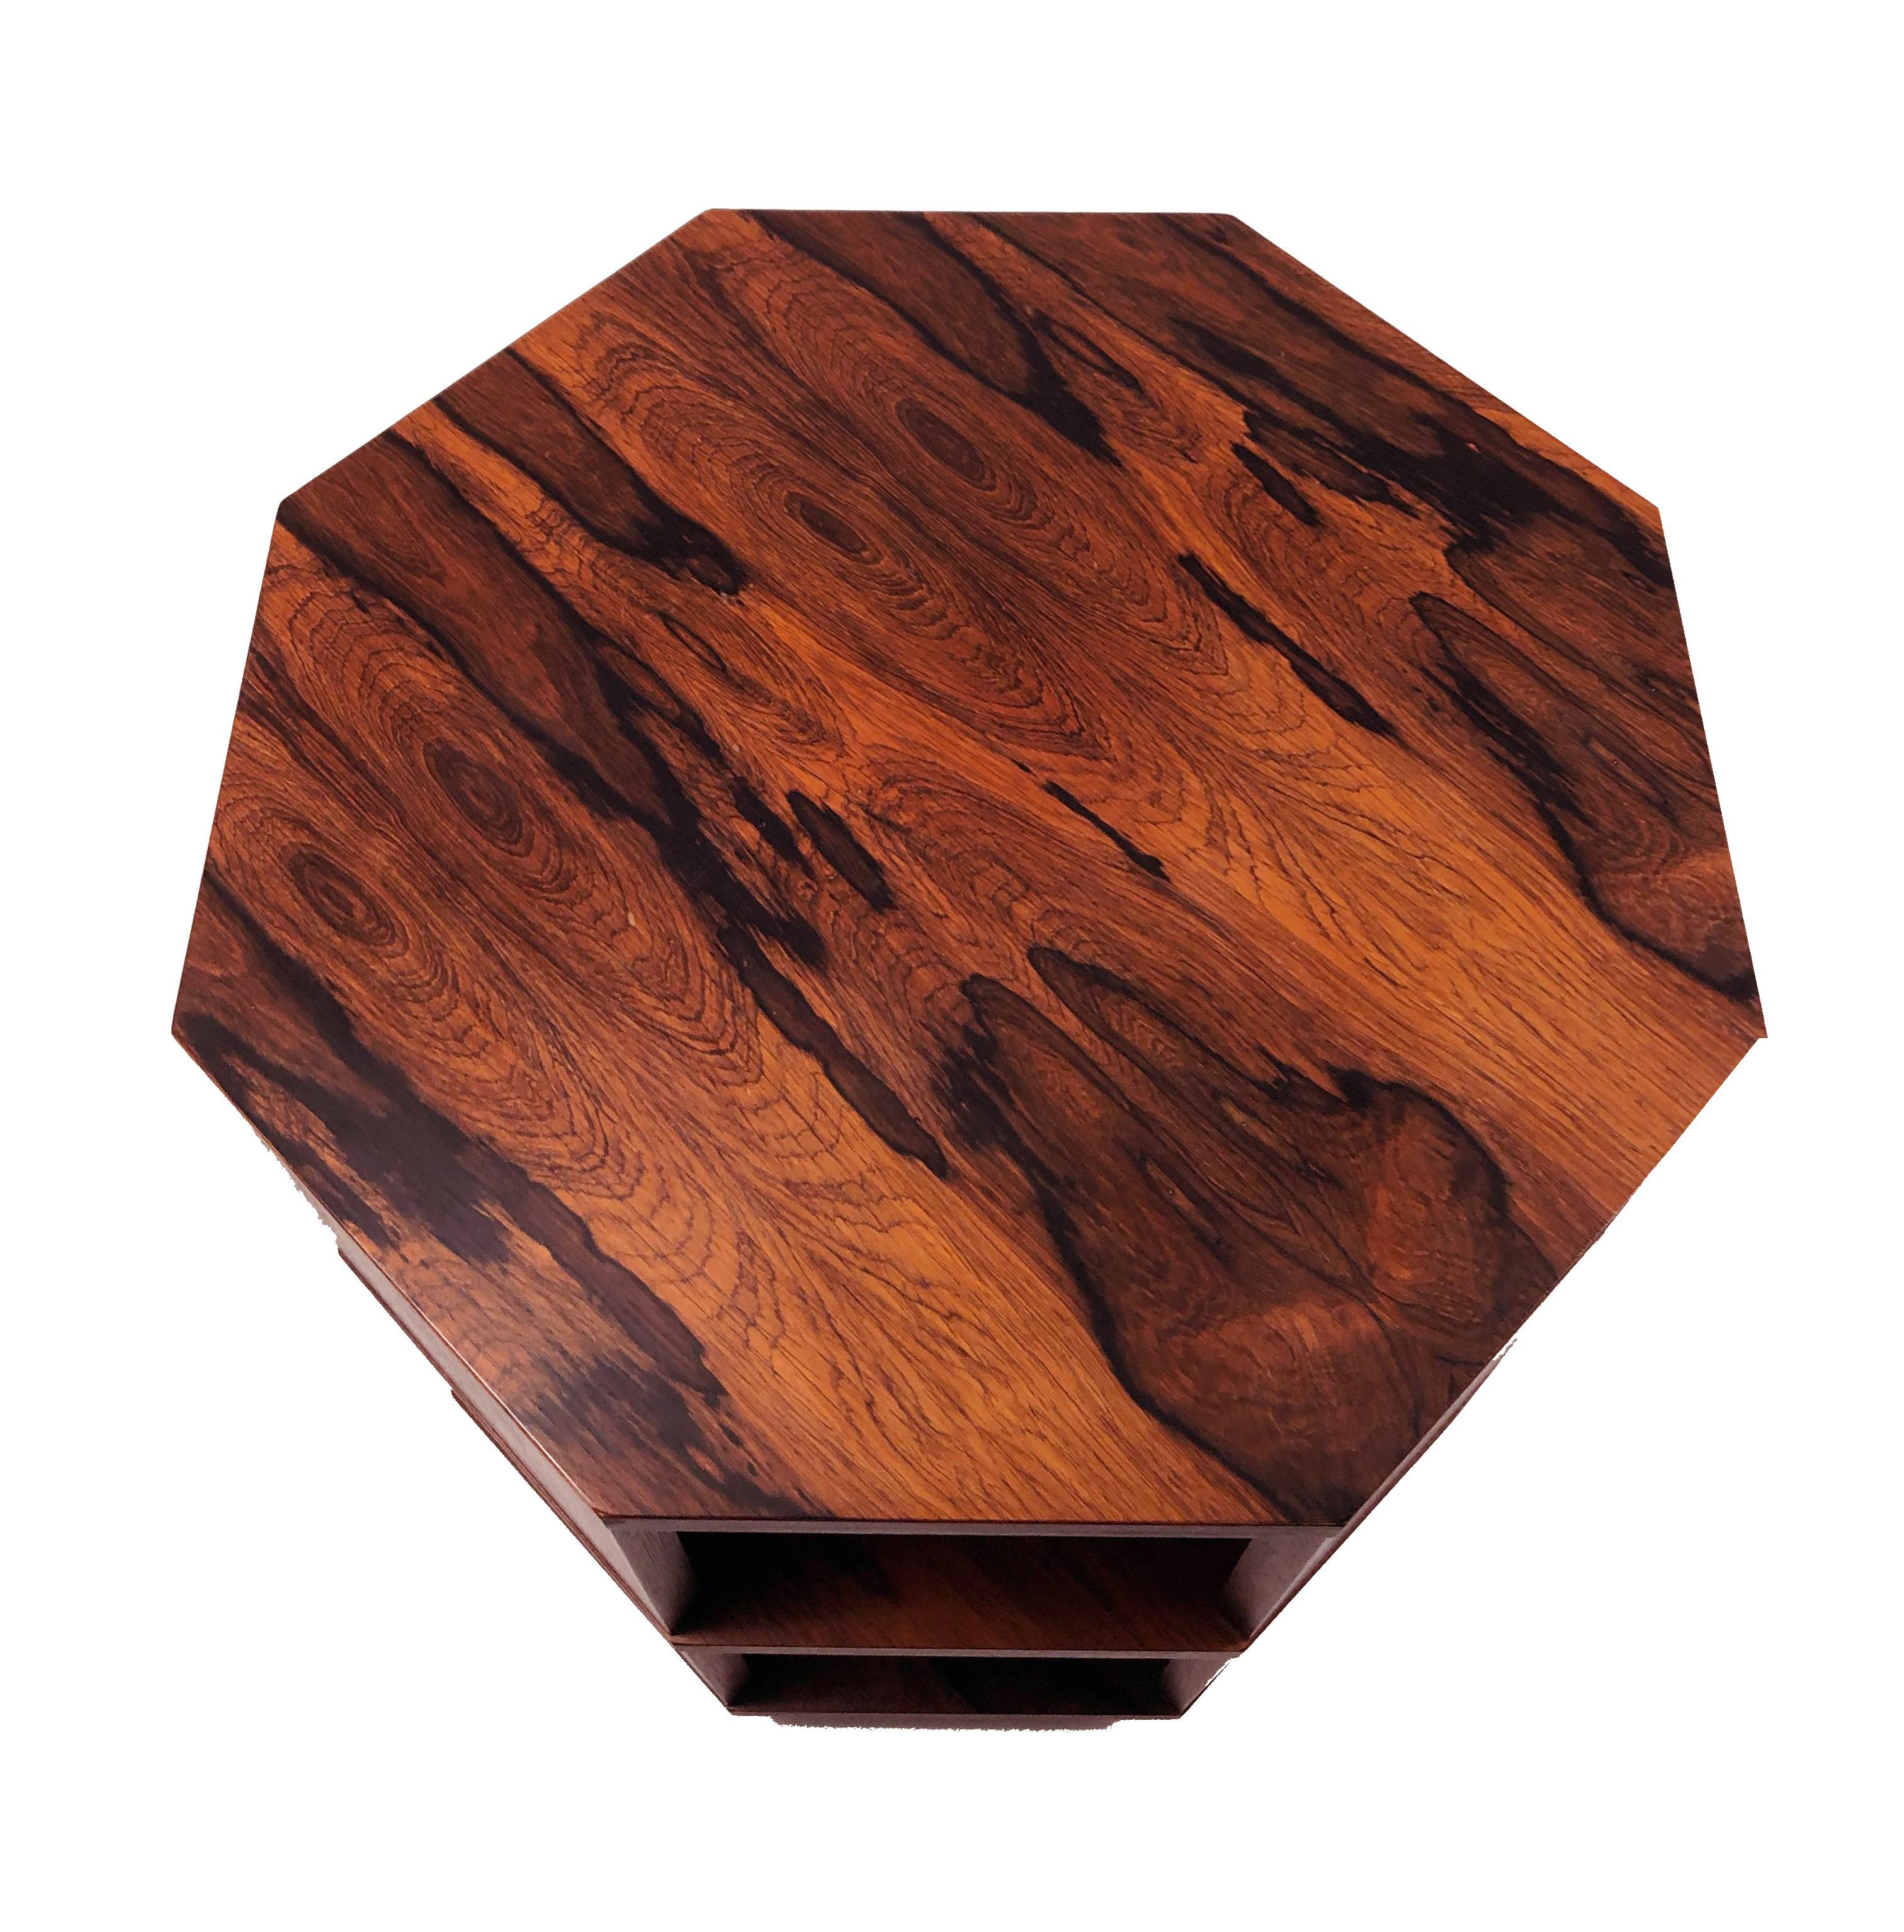 A beautiful rosewood octagonal side table with two inner shelf surfaces by Harvey Probber.